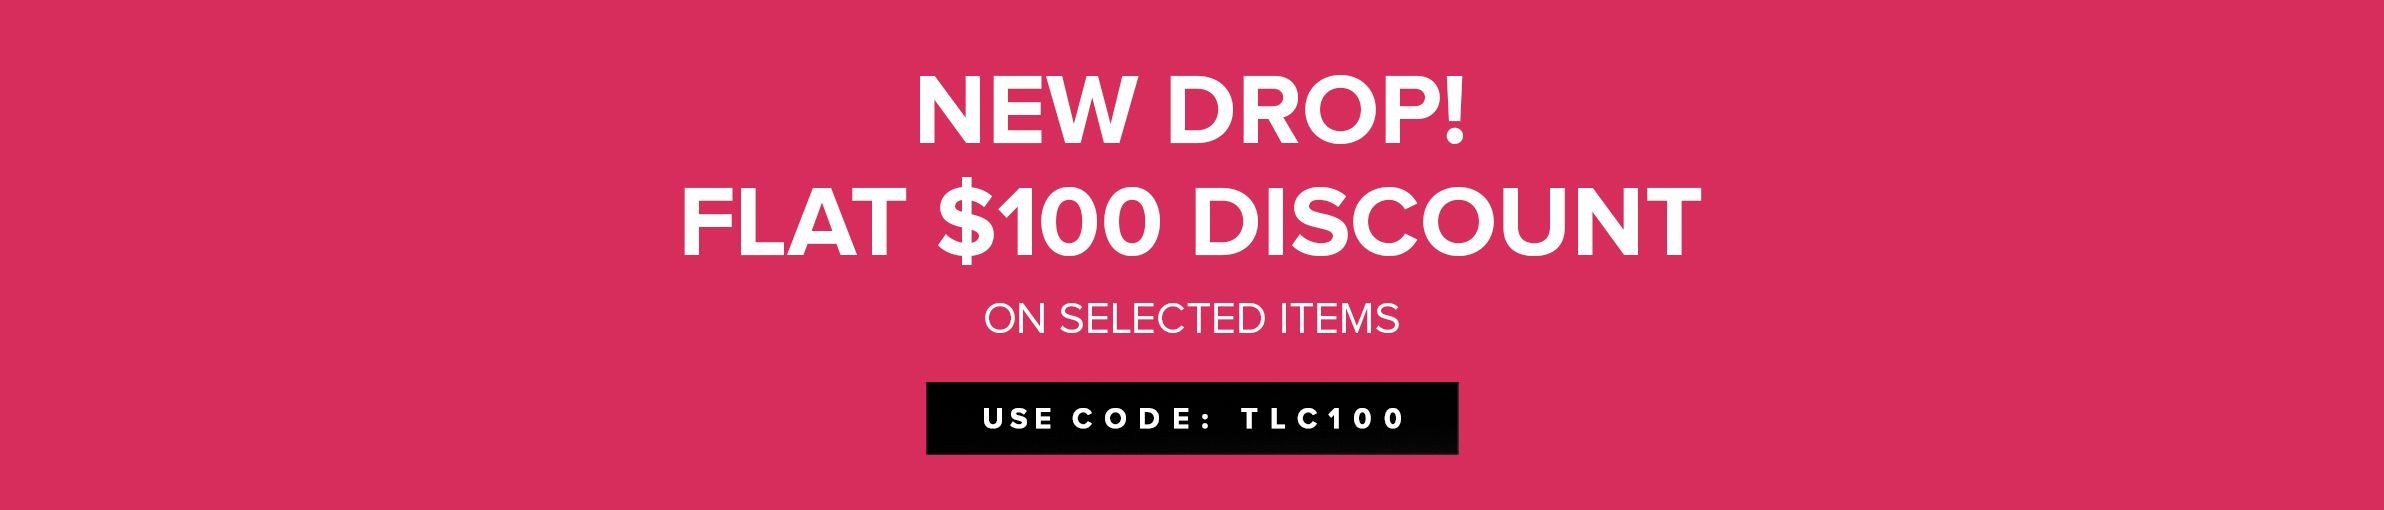 NEW DROP! FLAT $100 DISCOUNT ON SELECTED ITEMS 